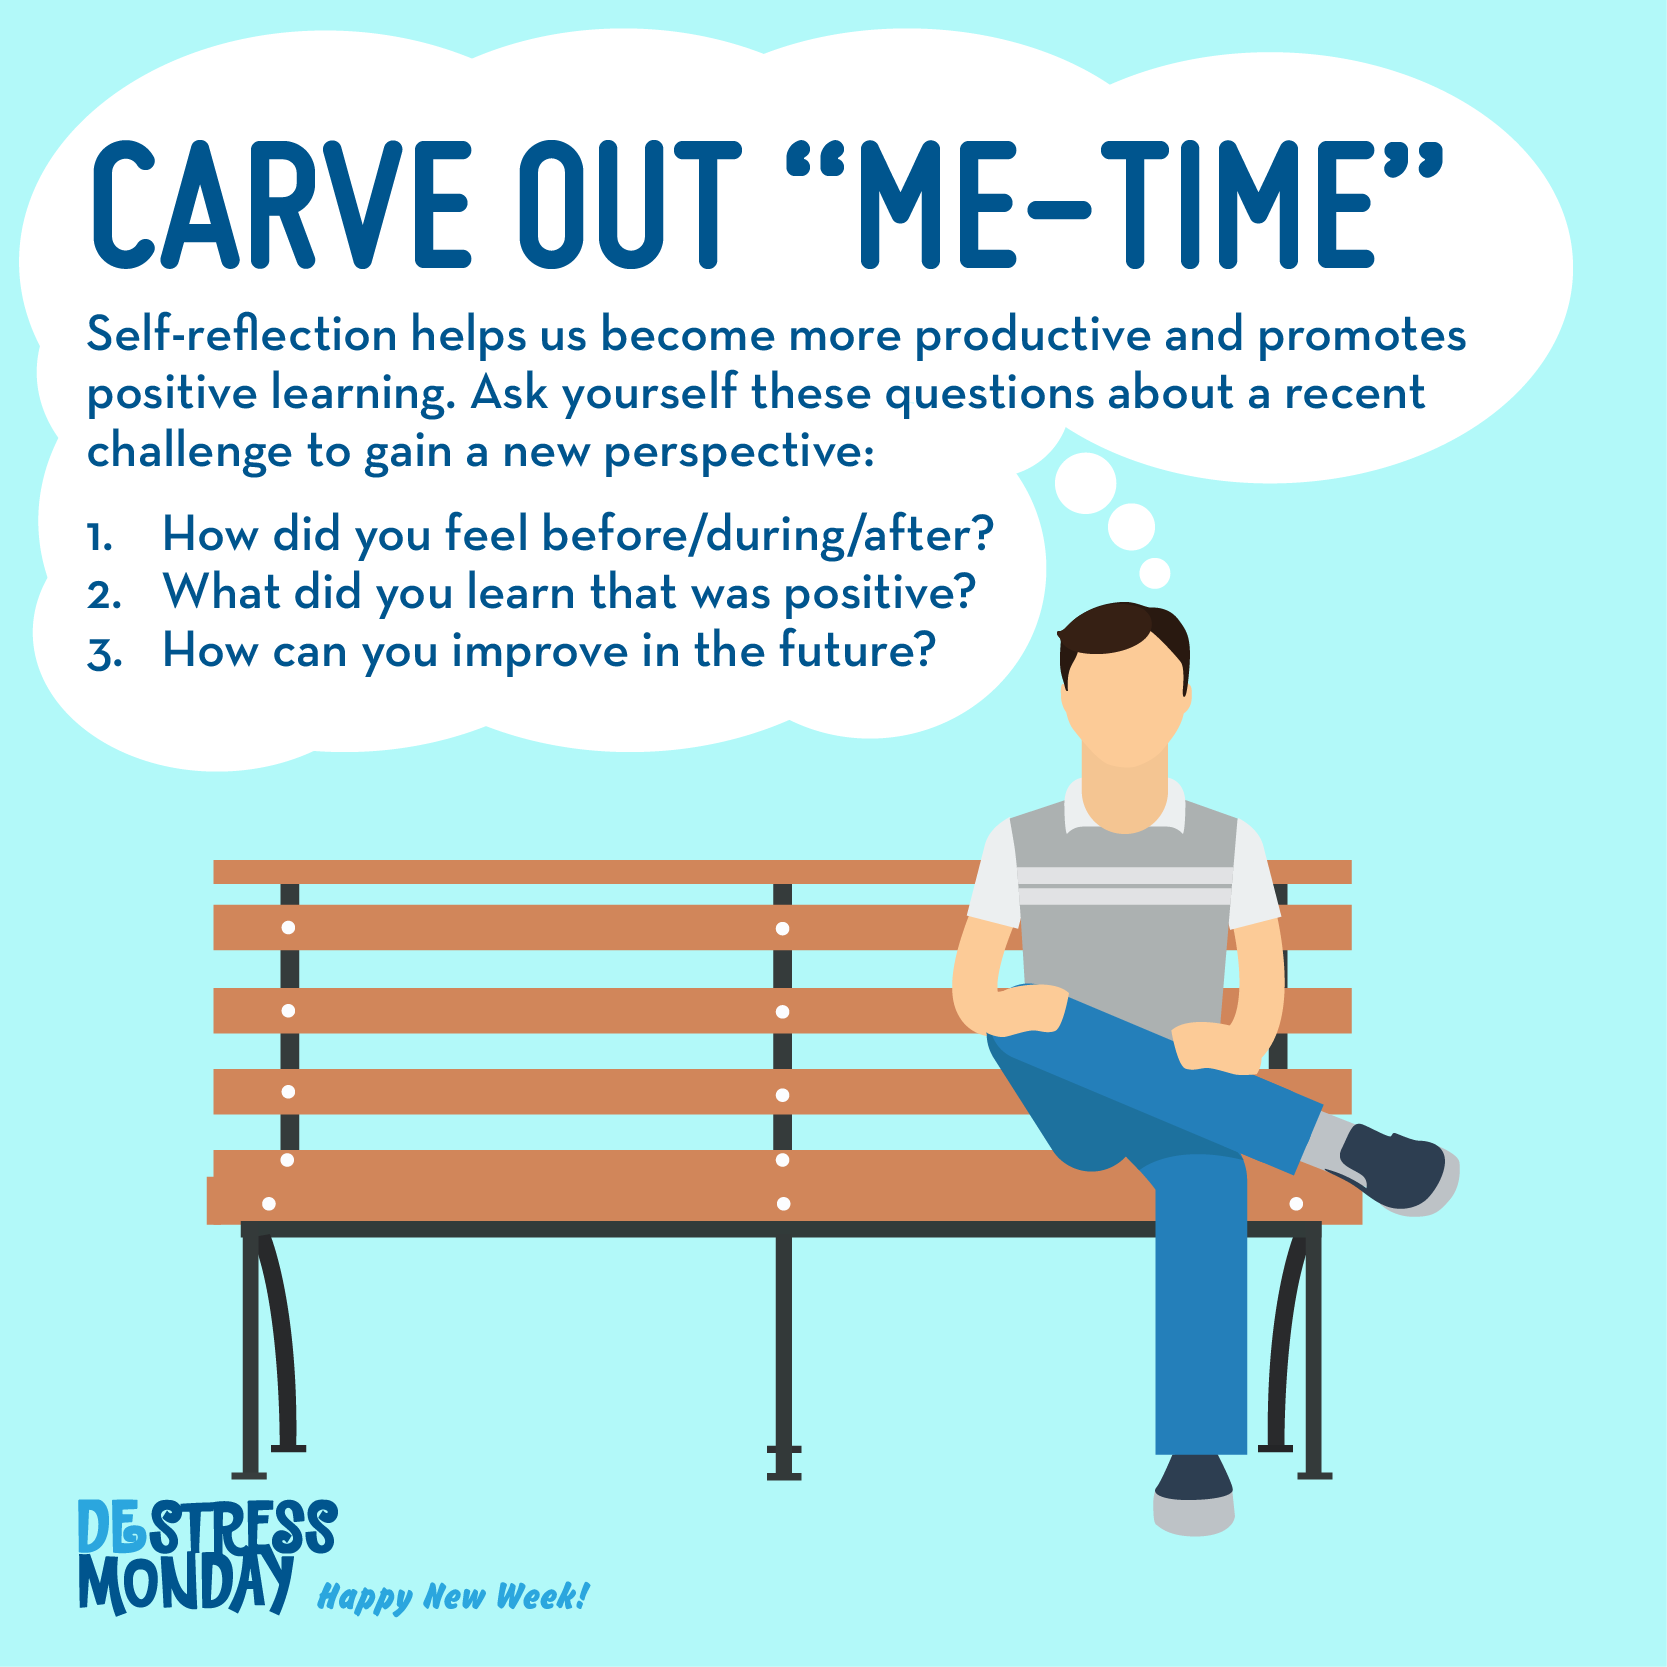 9-26-16-carve-out-me-time-tip